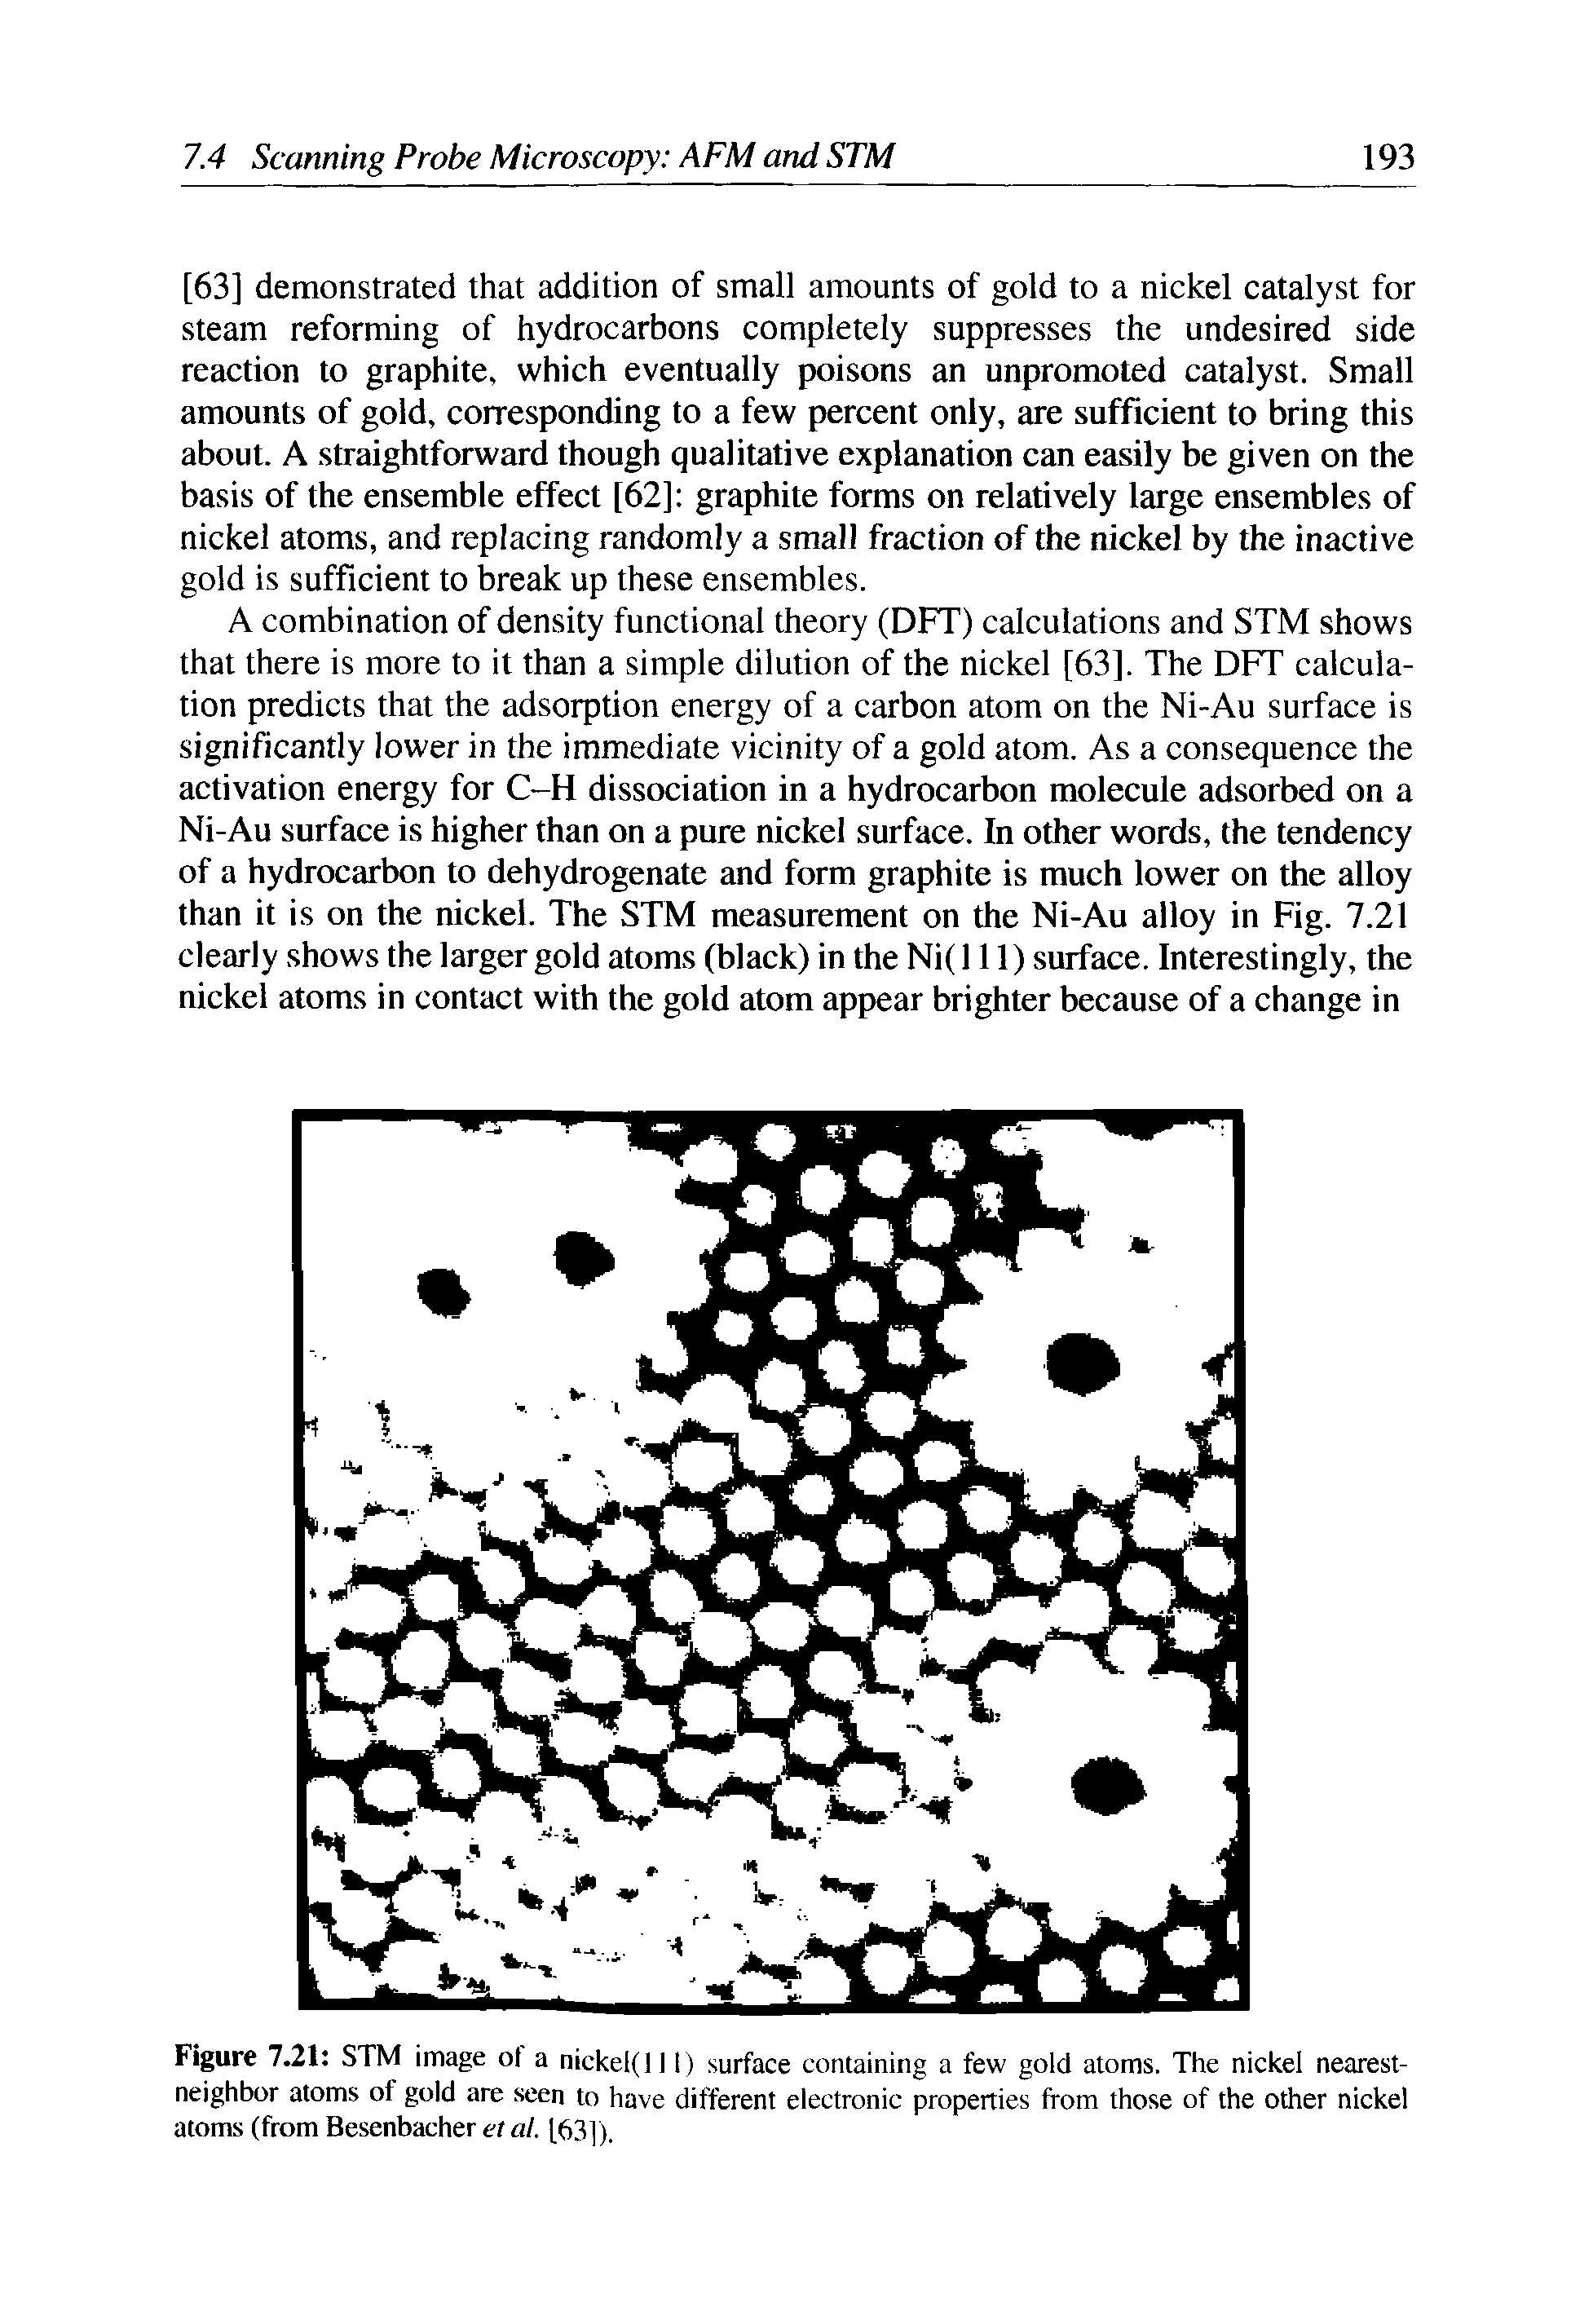 Figure 7.21 STM image ot a nickel(ll I) surface containing a few gold atoms. The nickel nearest-neighbor atoms of gold are seen to have different electronic properties from those of the other nickel atoms (from Besenbacher et at. [63]).